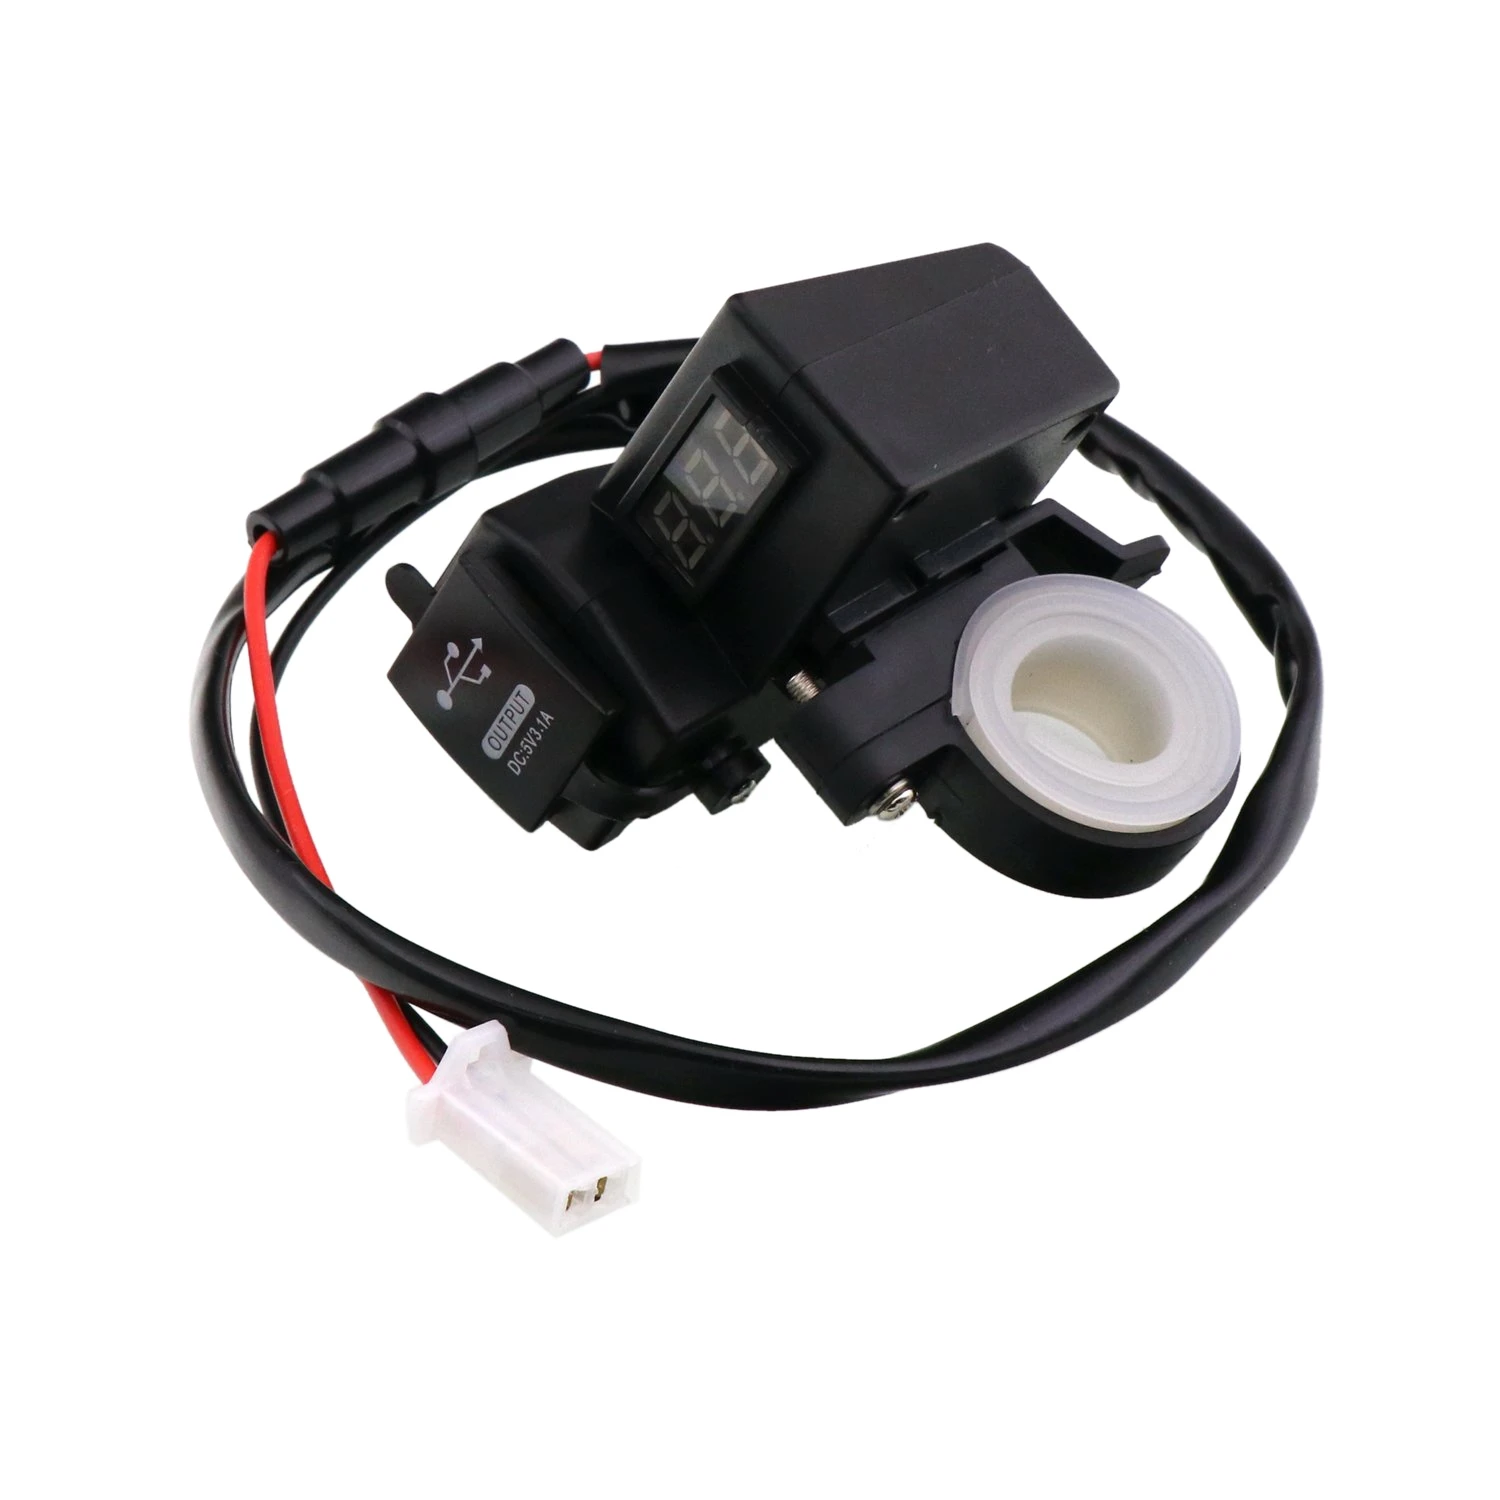 

Waterproof Motorcycle 5V 3.1A Dual USB Charger & Blue Voltage Display Voltmeter for 7/8 and 1inch Handlebar Mounting